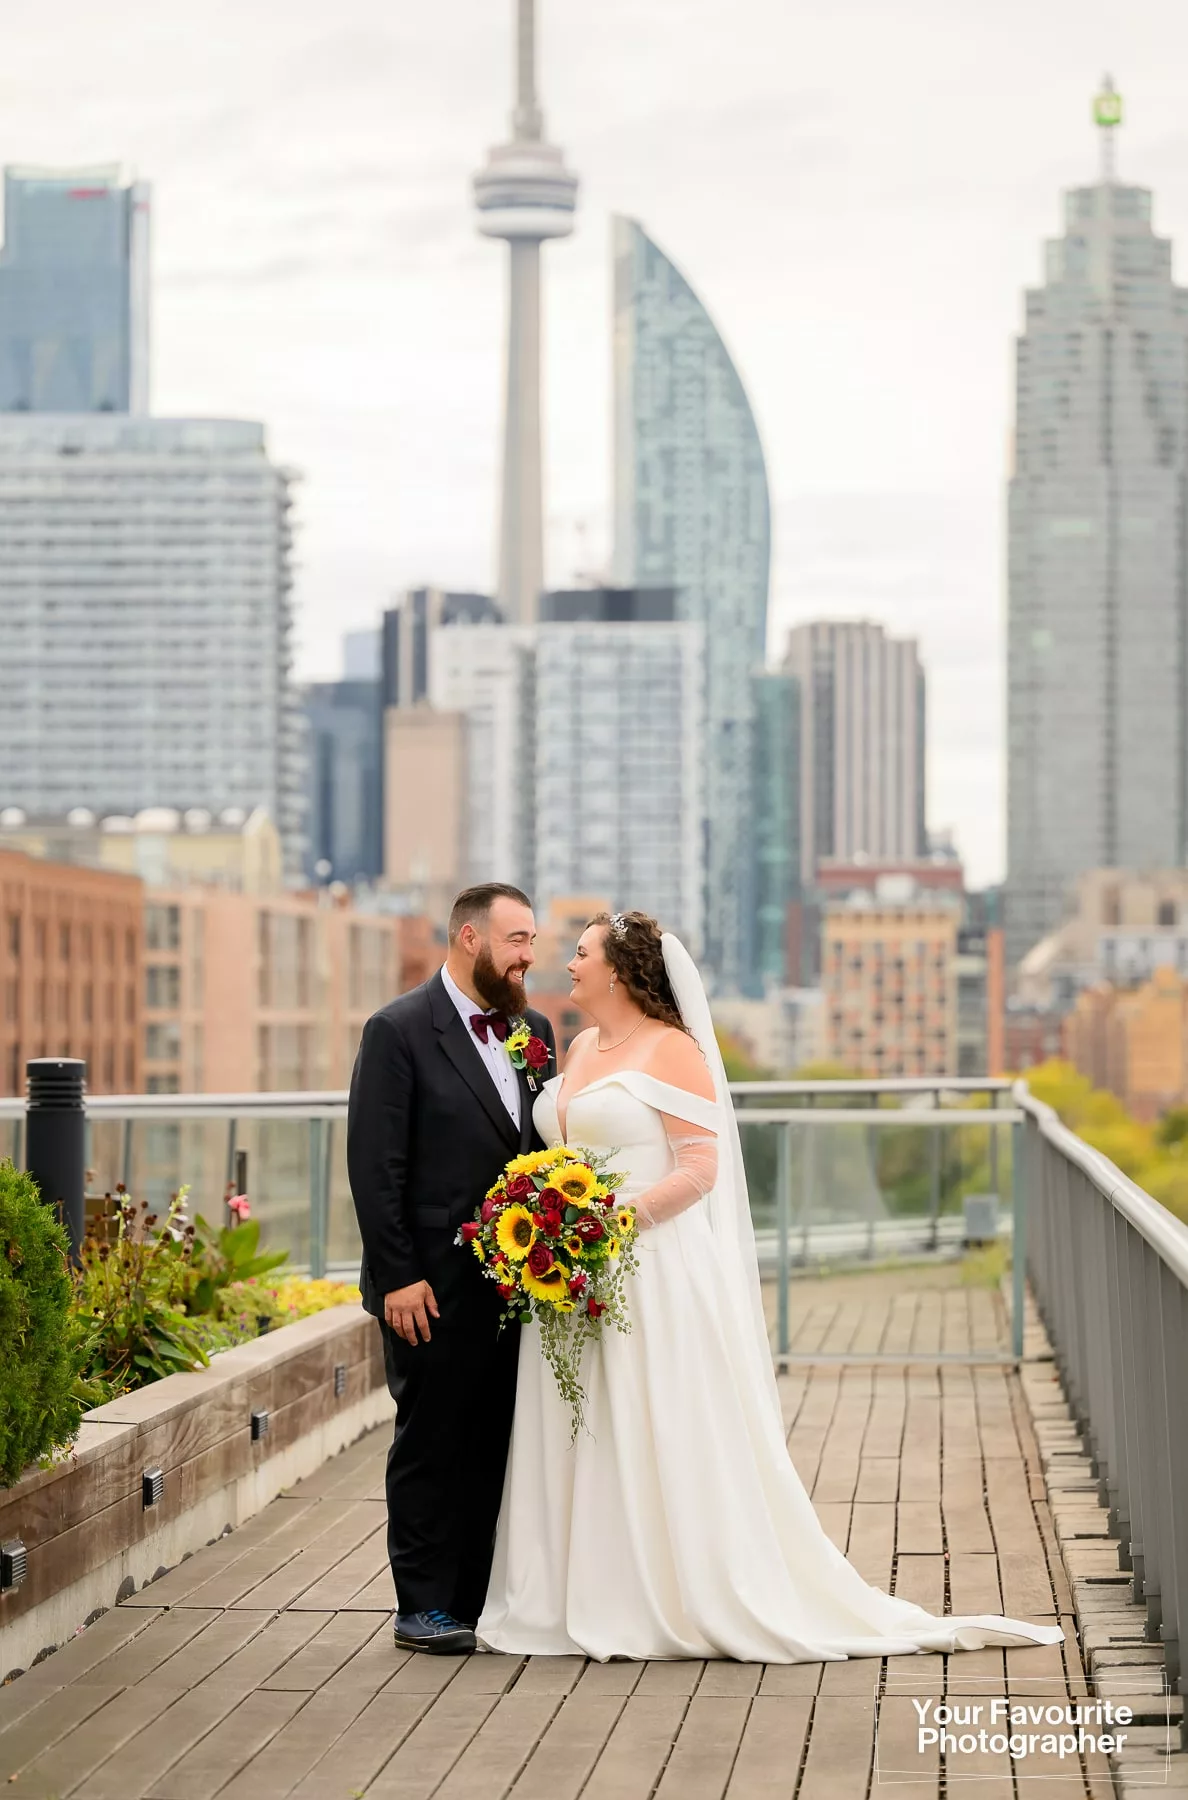 Newly married couple Emily and Niko pose on a rooftop patio with the skyline of downtown Toronto visible in the background